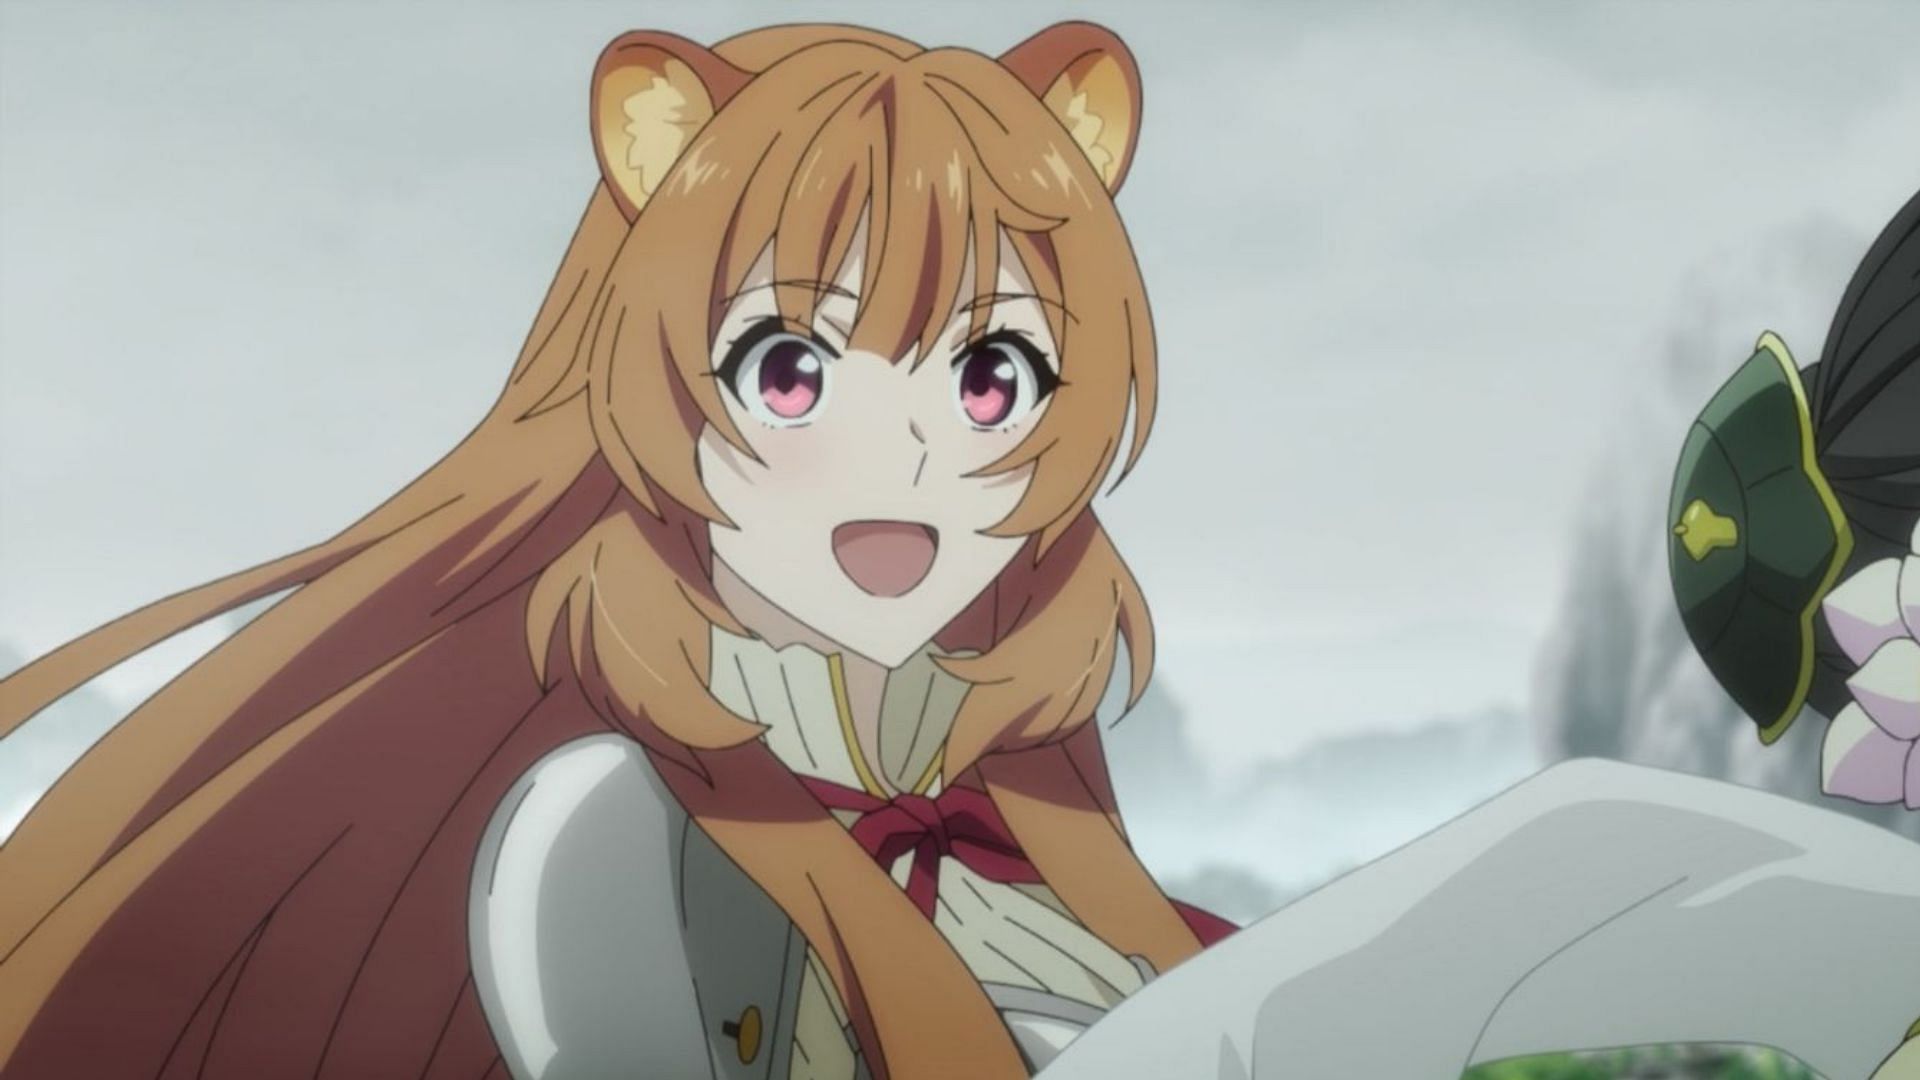 Her hair color is a mix of orange and brown (Image via Kinema Citrus)